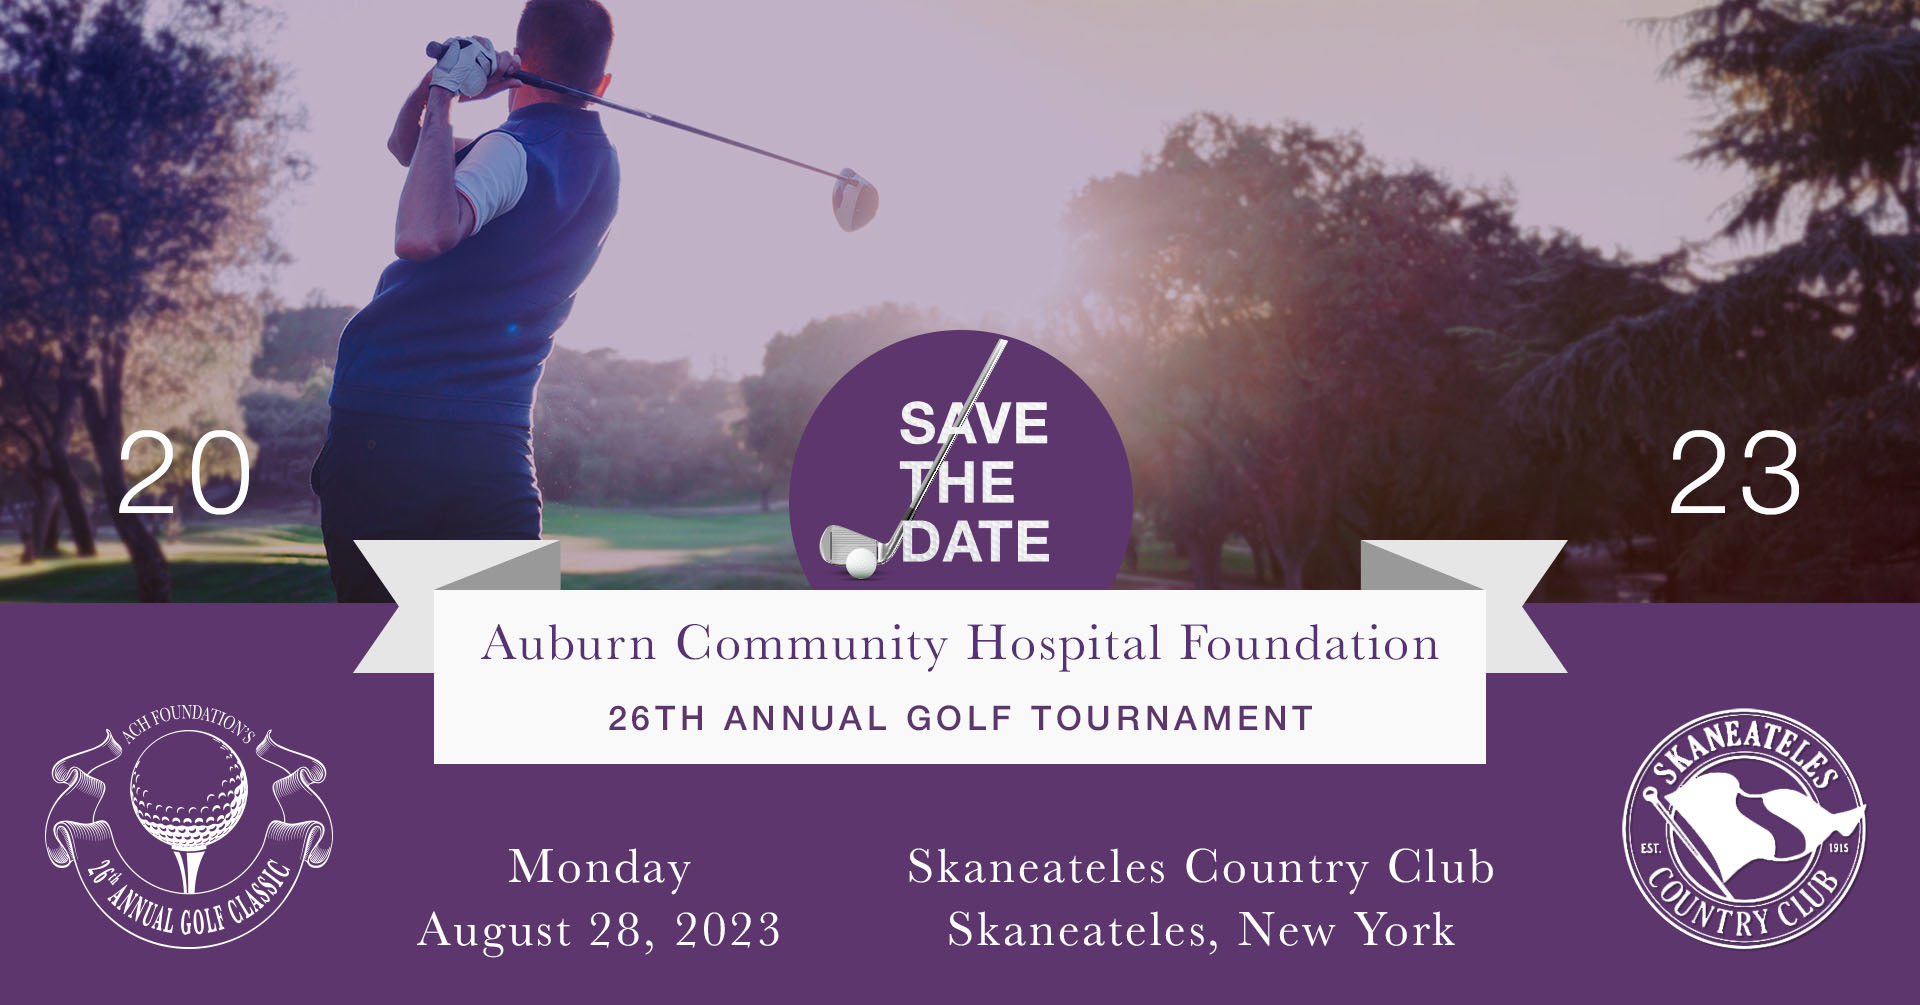 Save the Date for the Auburn Community Hospital Foundation 26th Annual Golf Tournament on Monday, August 28, 2023 at Skaneateles Country Club